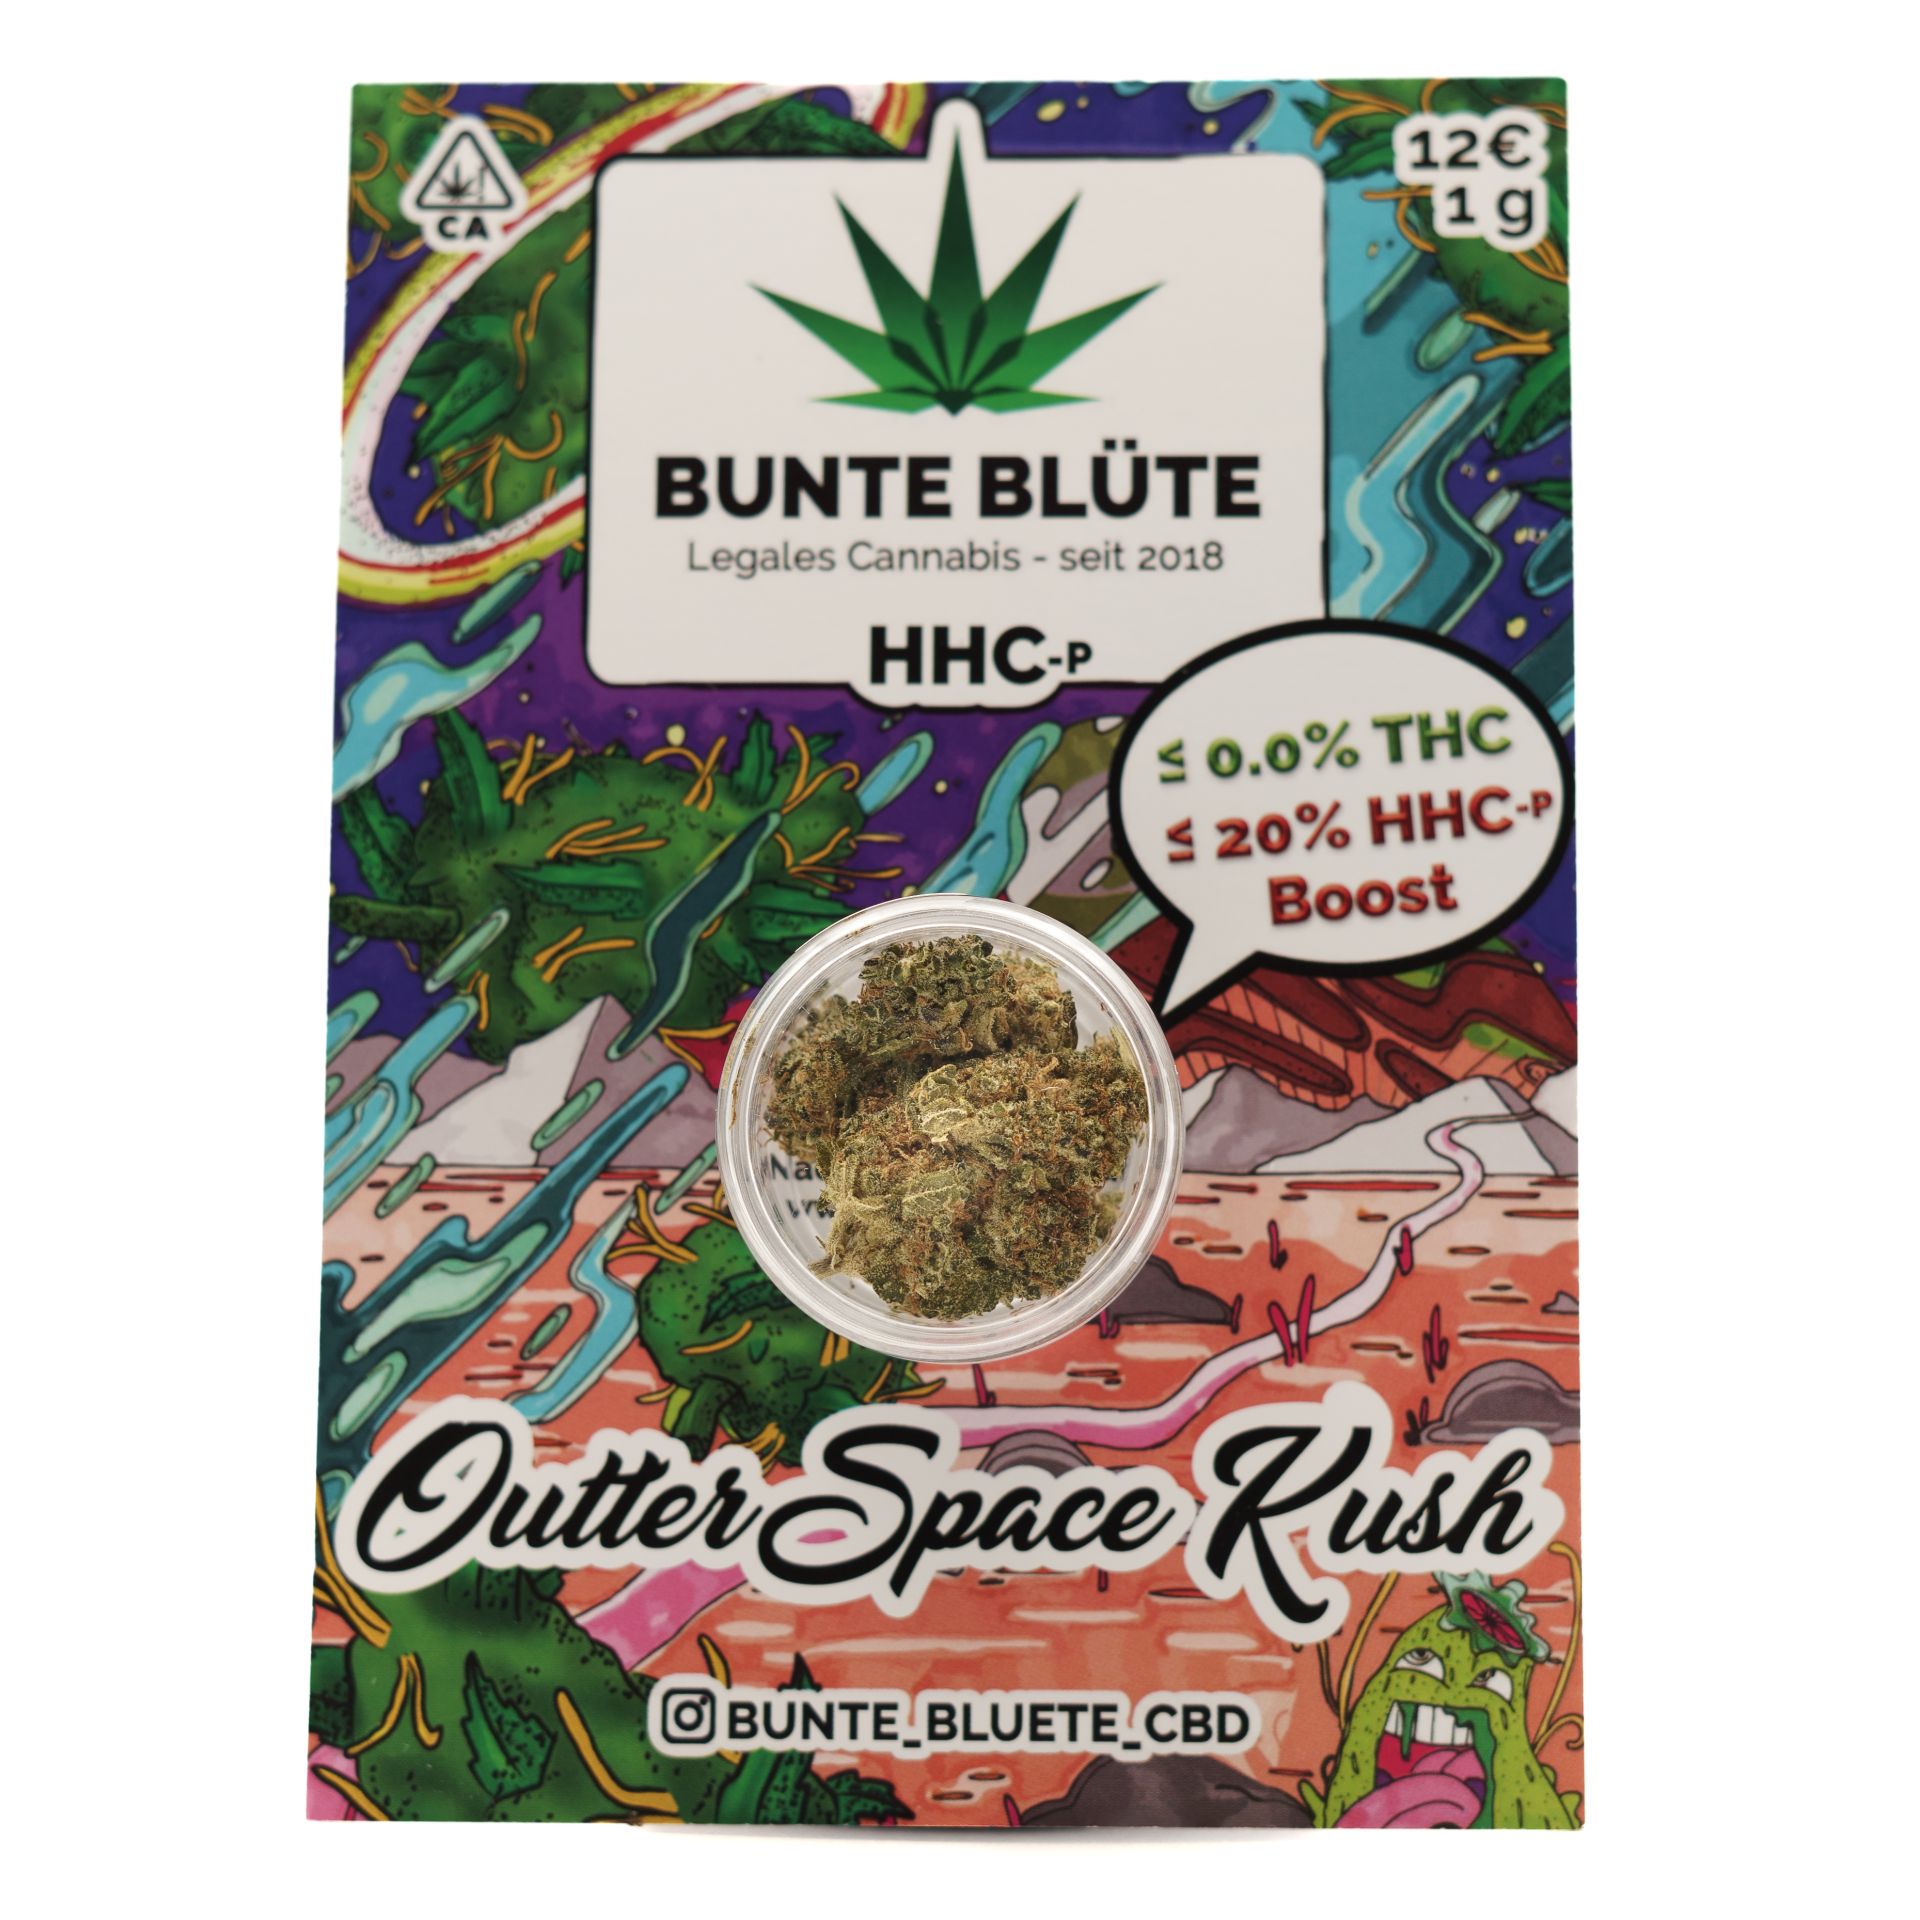 Bunte Blüte HHC-P Blüte - Outer Space Kush 20% 1g